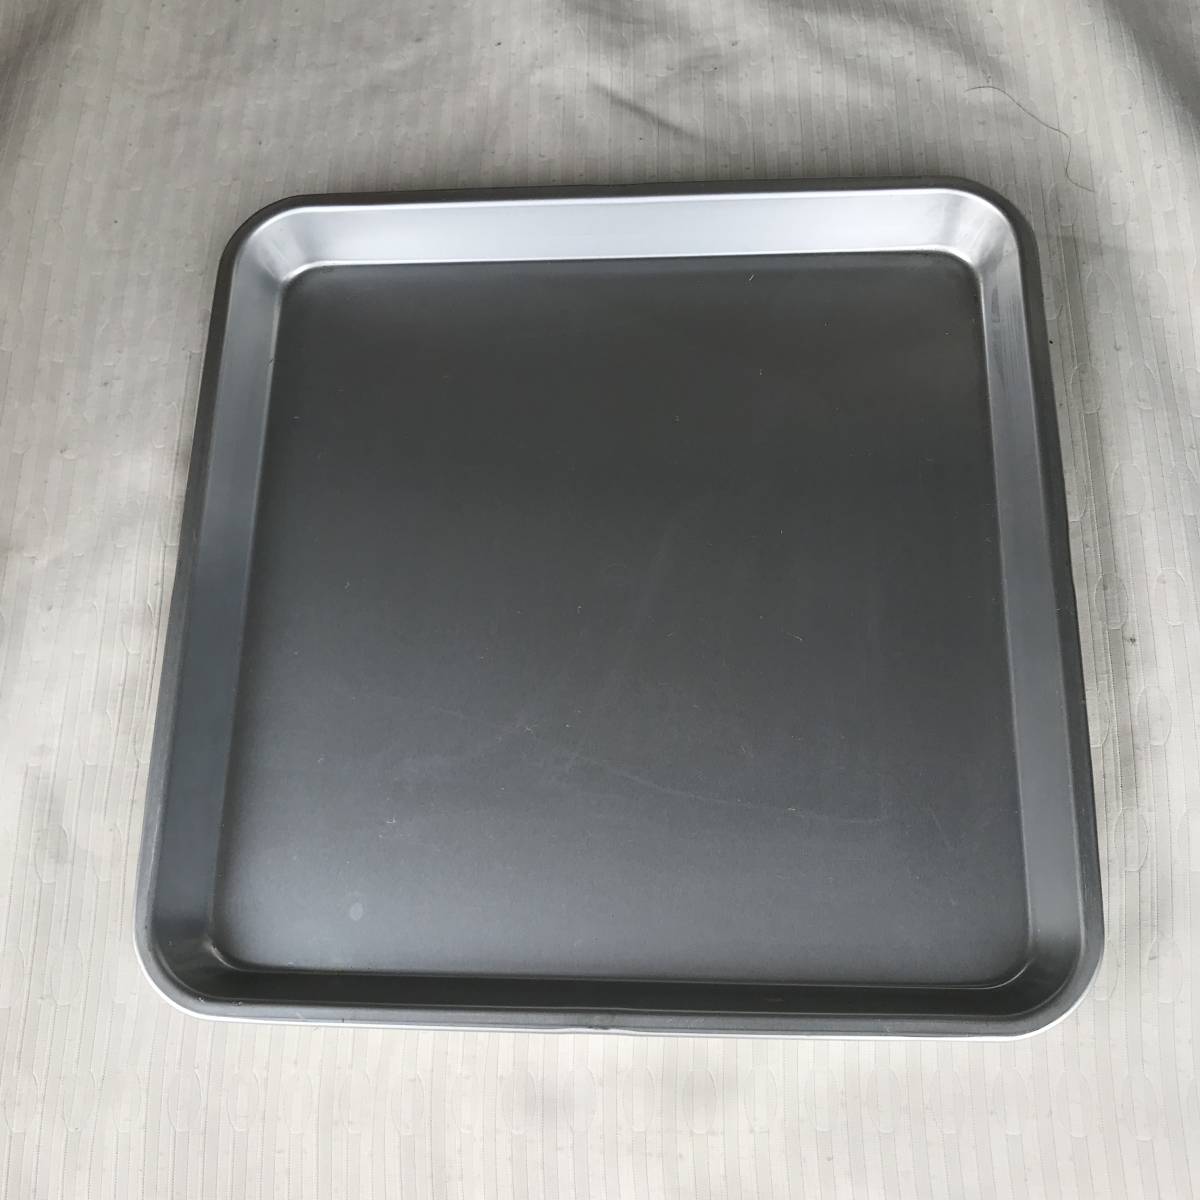  angle serving tray tray unusual made of metal 30×30×2.2cm light weight silver group color ho ksei day light made ** made in Japan unused 